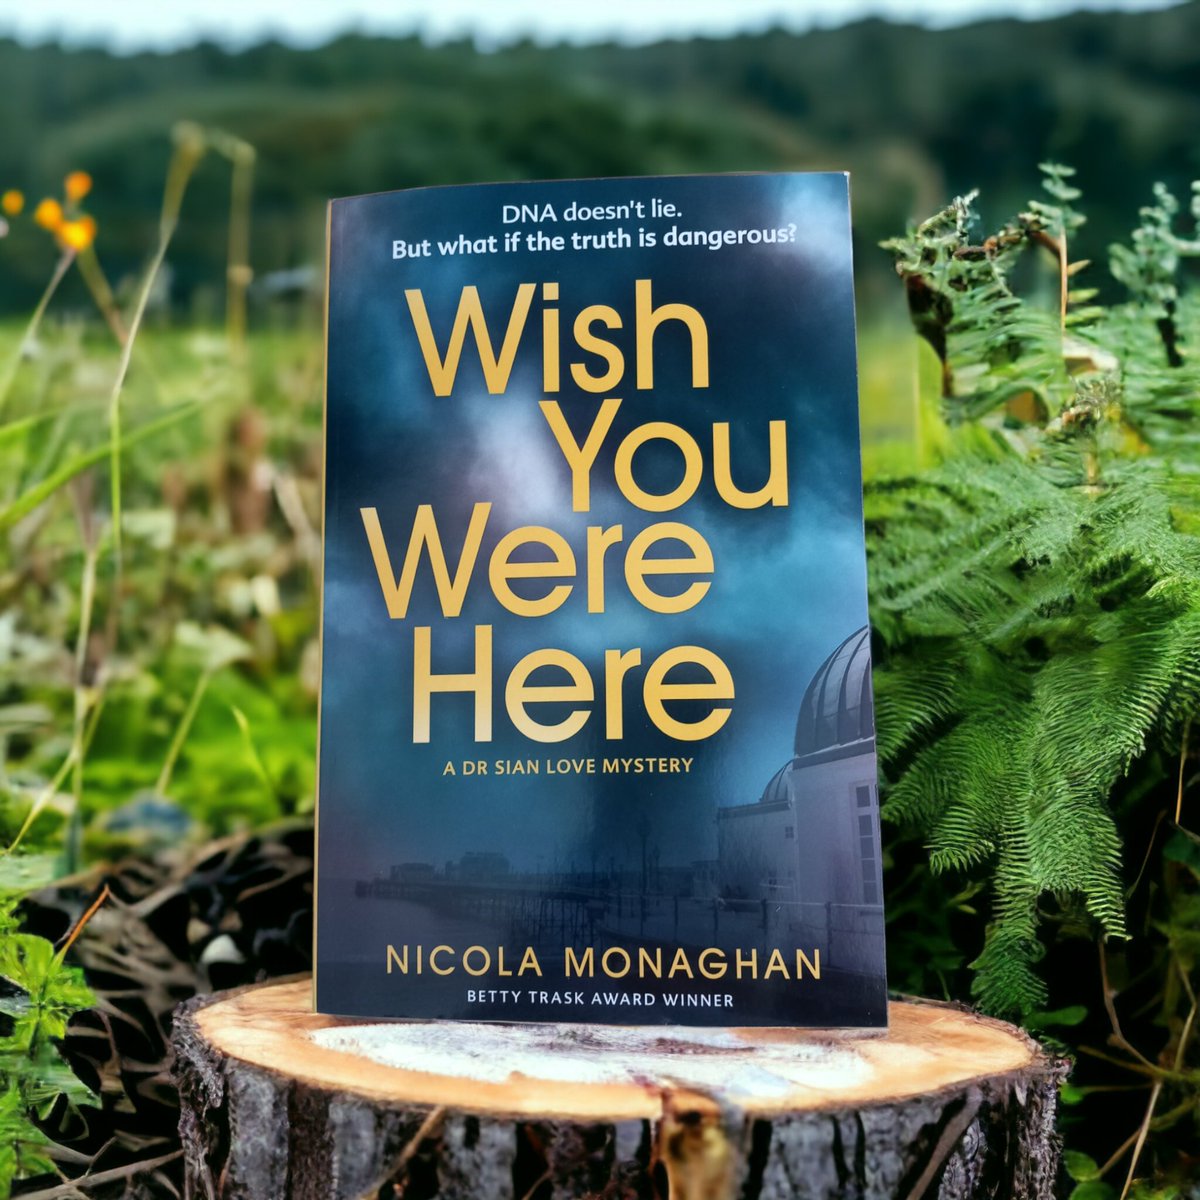 And thank you to @VERVE_Books fir sending me #WishYouWereHere by #NicolaMonaghan for a #BlogTour #Blogger #BookTwitter #SoGrateful #SoThankful #BookBlogger